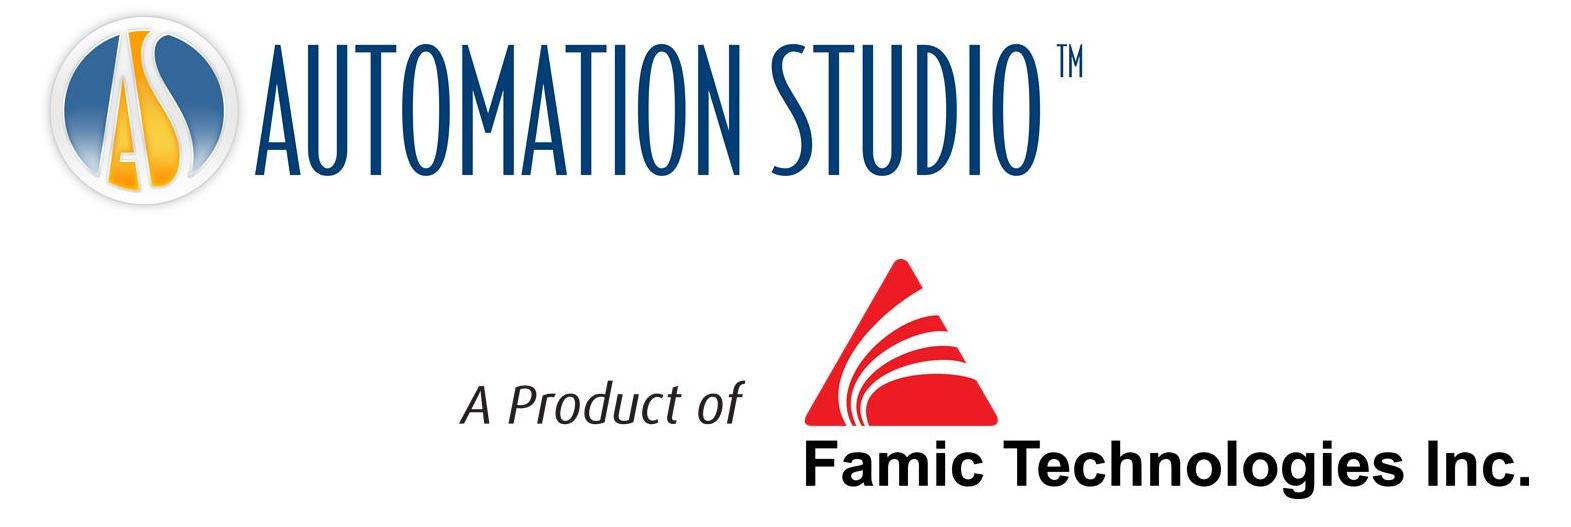 automation studio 6.1 educational edition download